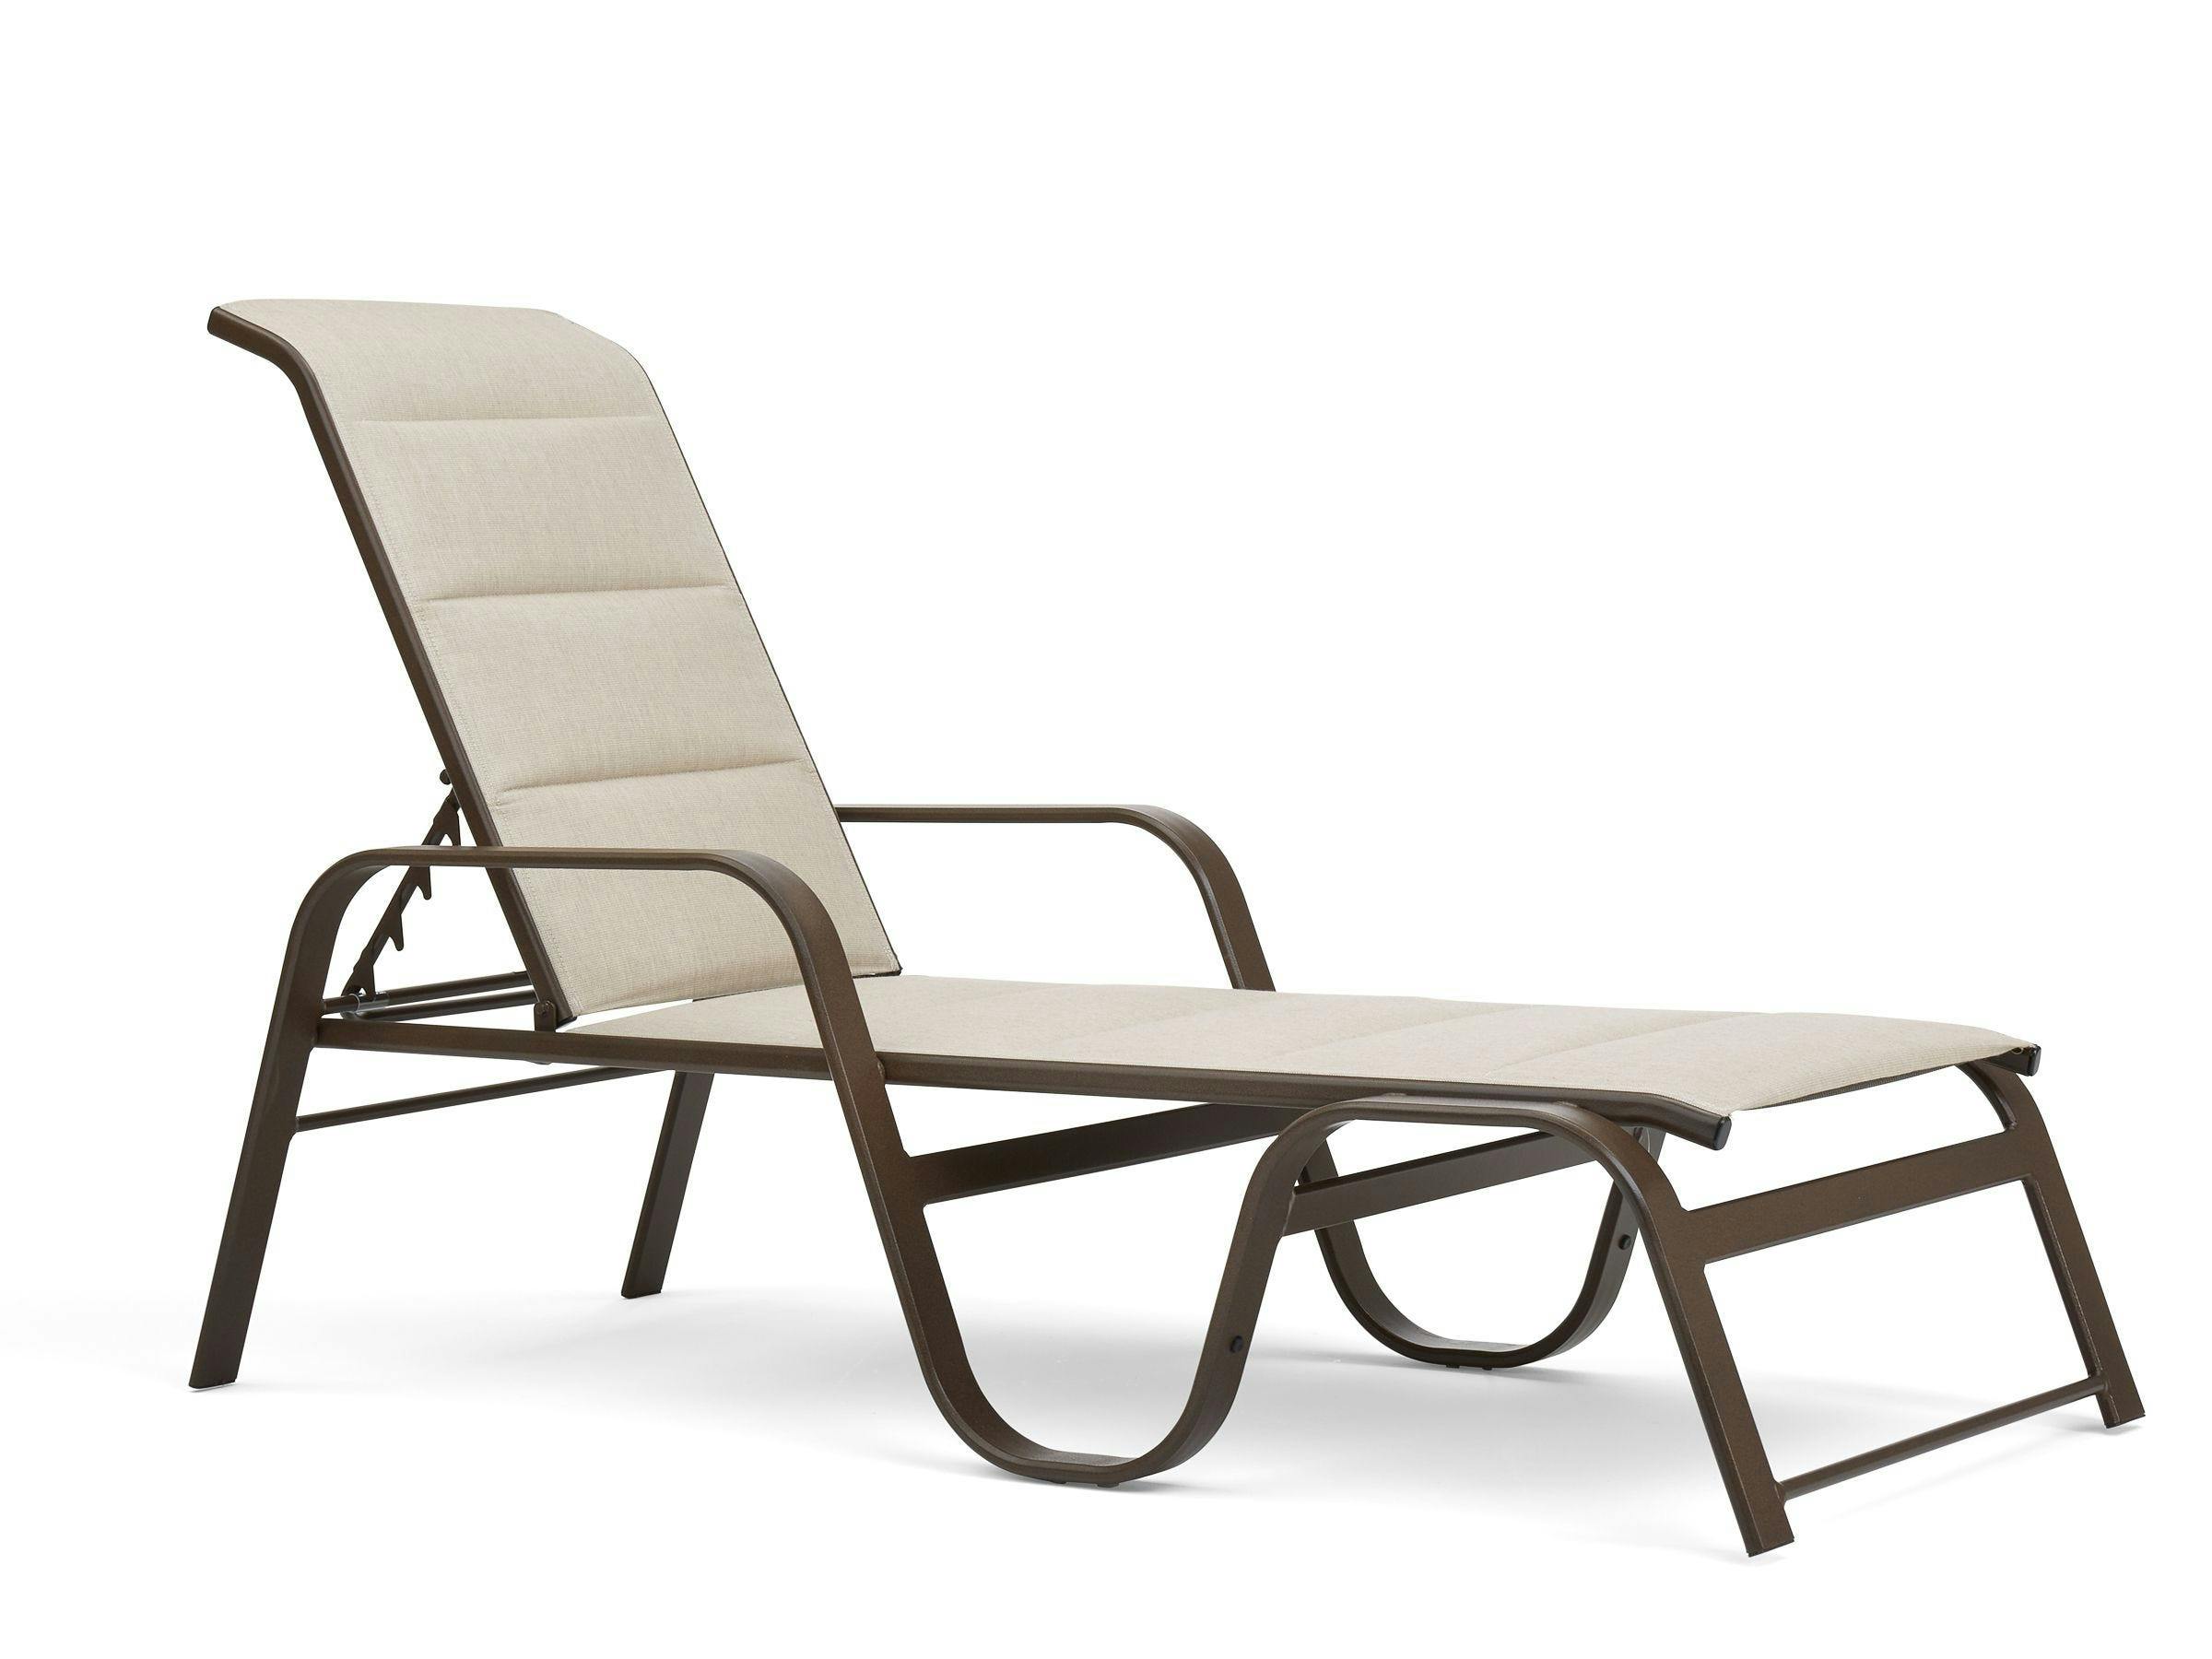 Key West Padded Sling Stackable Adjustable Chaise